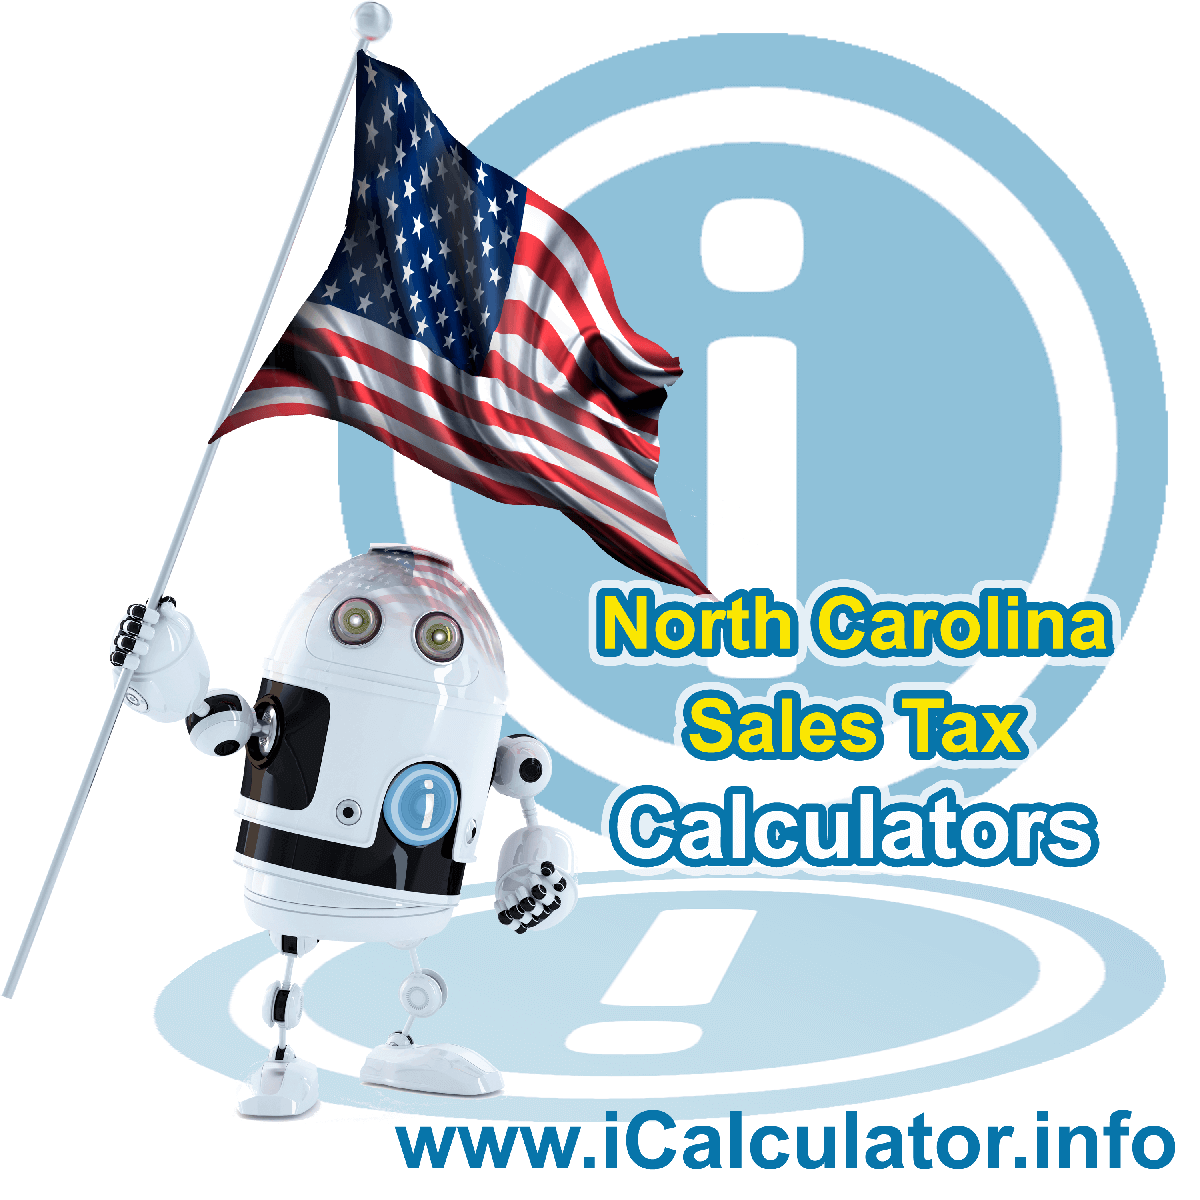 Pender County Sales Rates: This image illustrates a calculator robot calculating Pender County sales tax manually using the Pender County Sales Tax Formula. You can use this information to calculate Pender County Sales Tax manually or use the Pender County Sales Tax Calculator to calculate sales tax online.